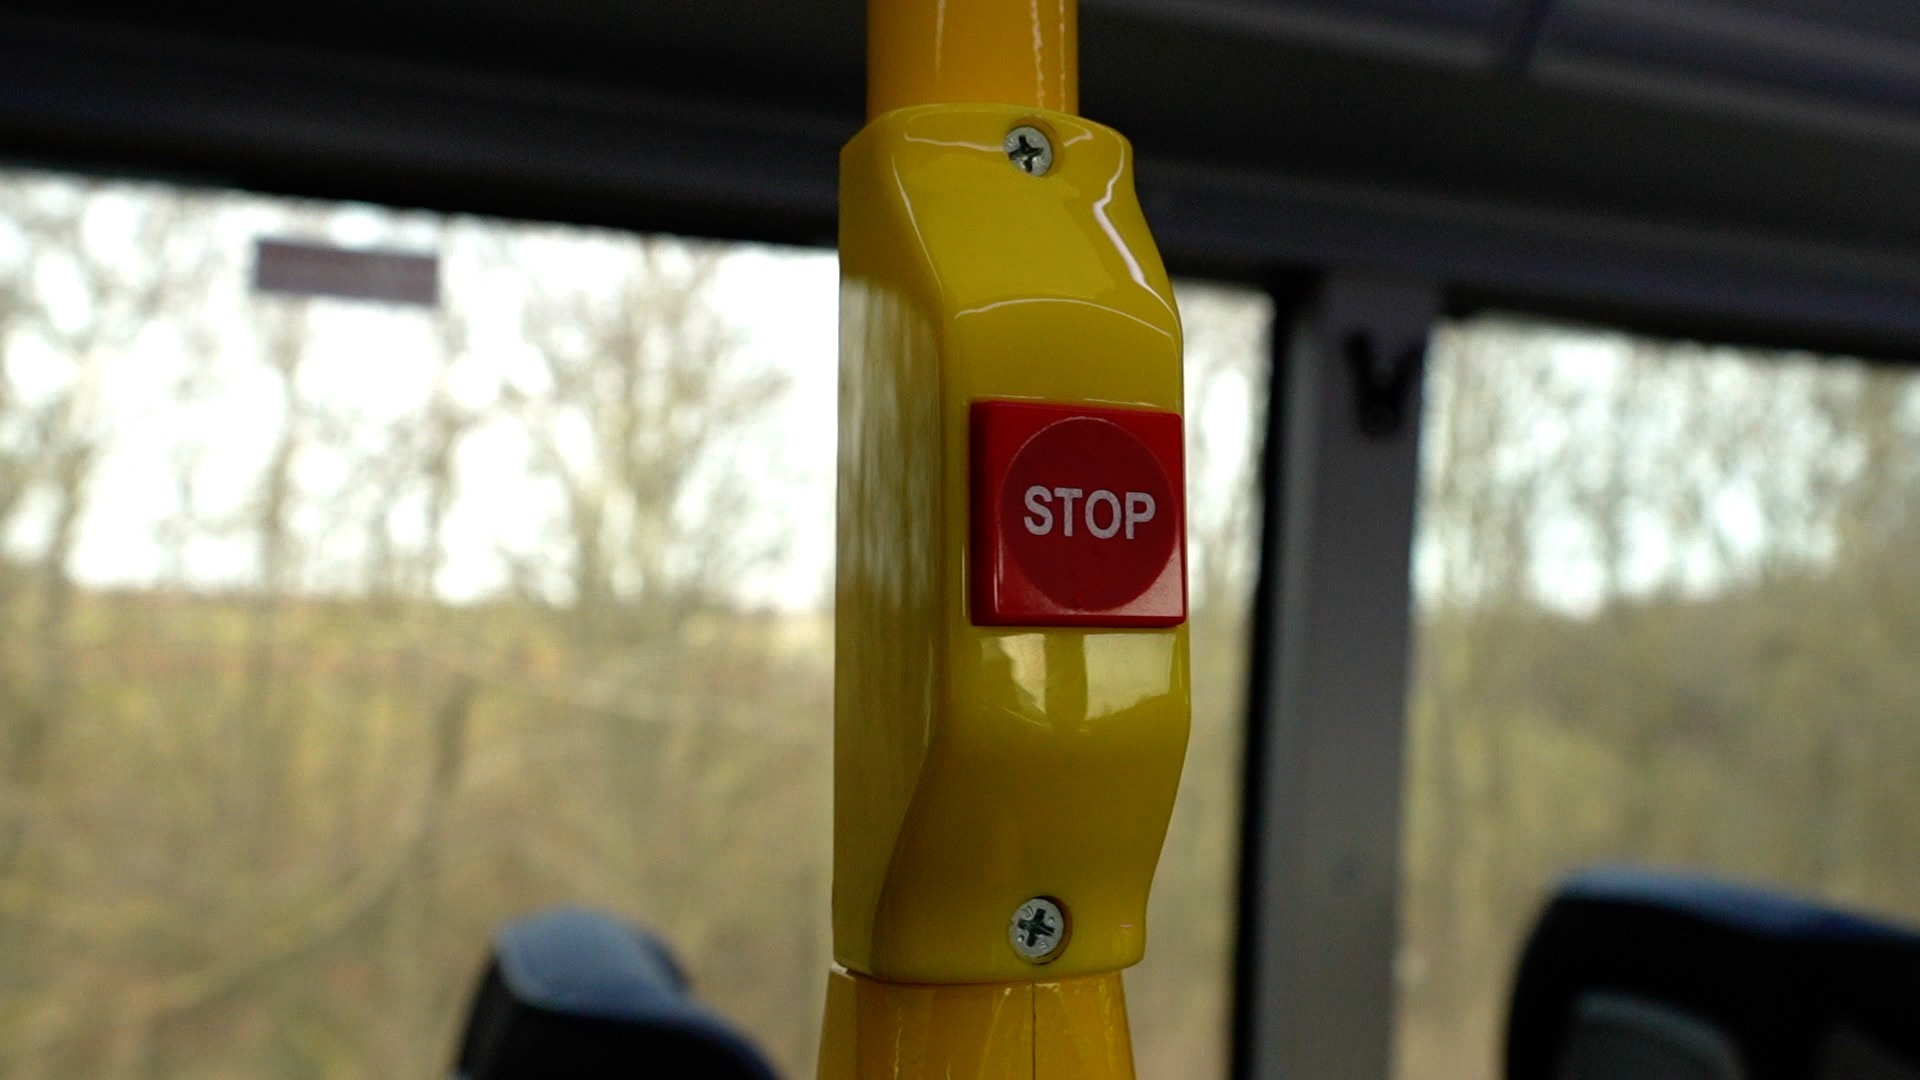 A stop button on a bus